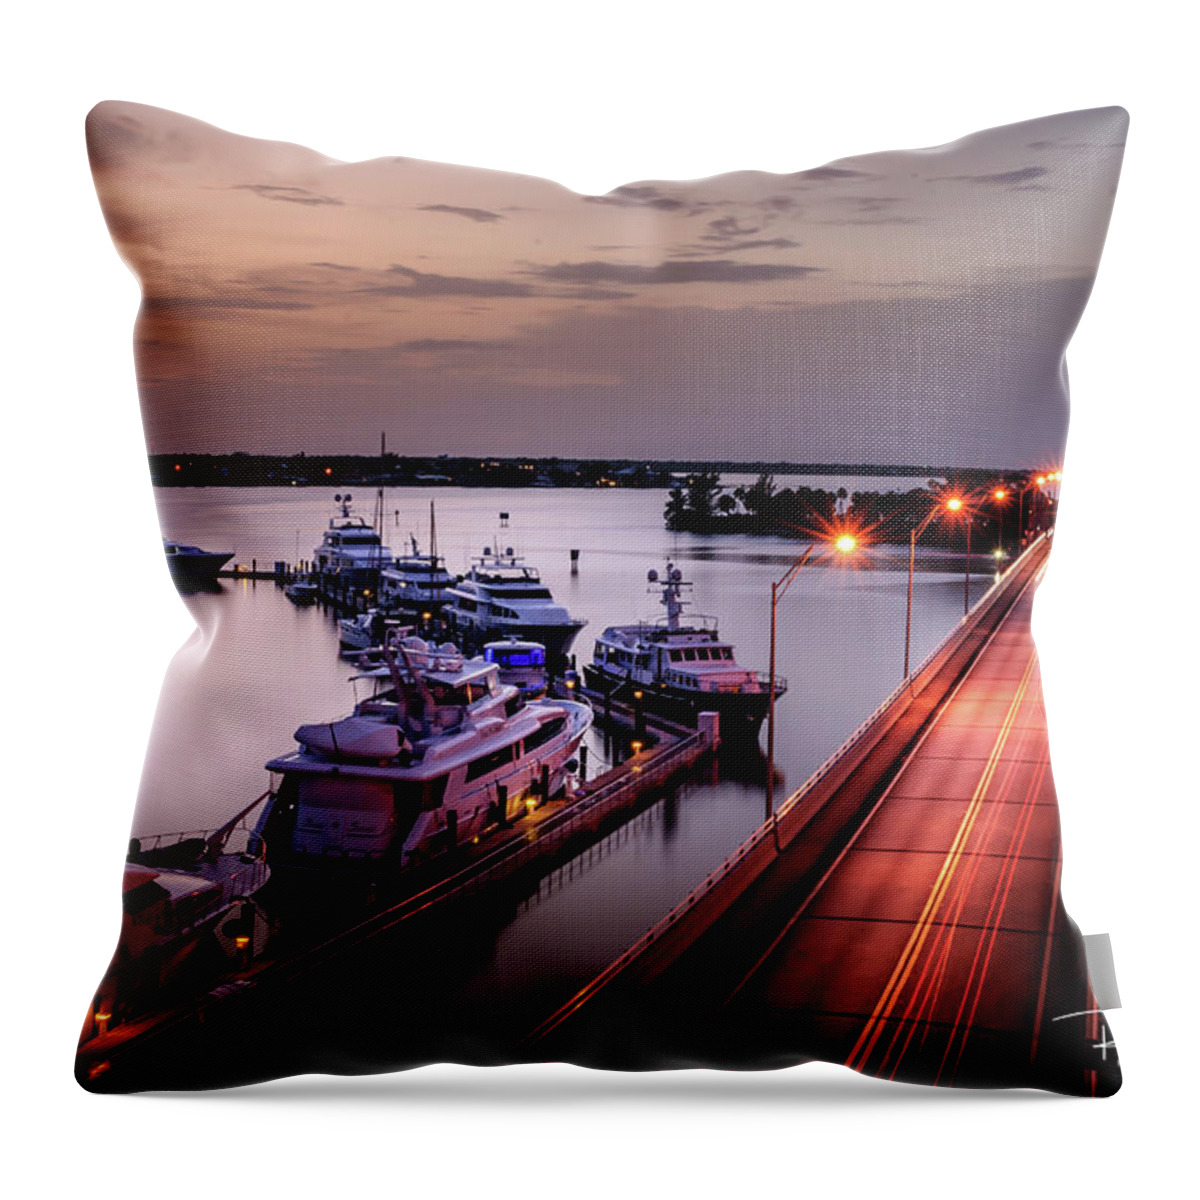 Boat Throw Pillow featuring the photograph Passing Lights by Rob Smith's